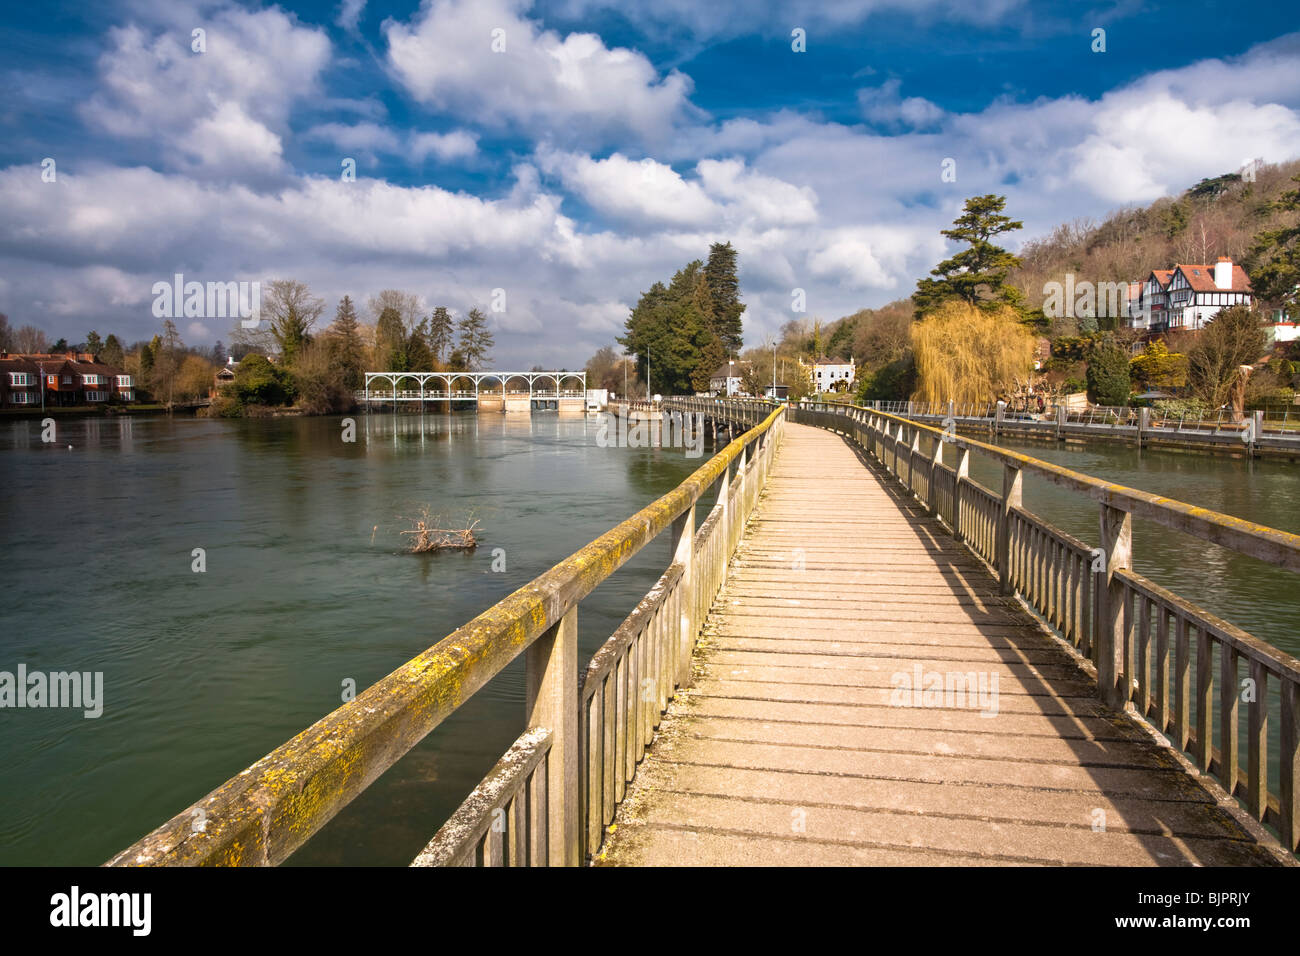 Looking along the wooden footbridge over the River Thames towards Marsh Lock near Henley on Thames in Oxfordshire, Uk Stock Photo